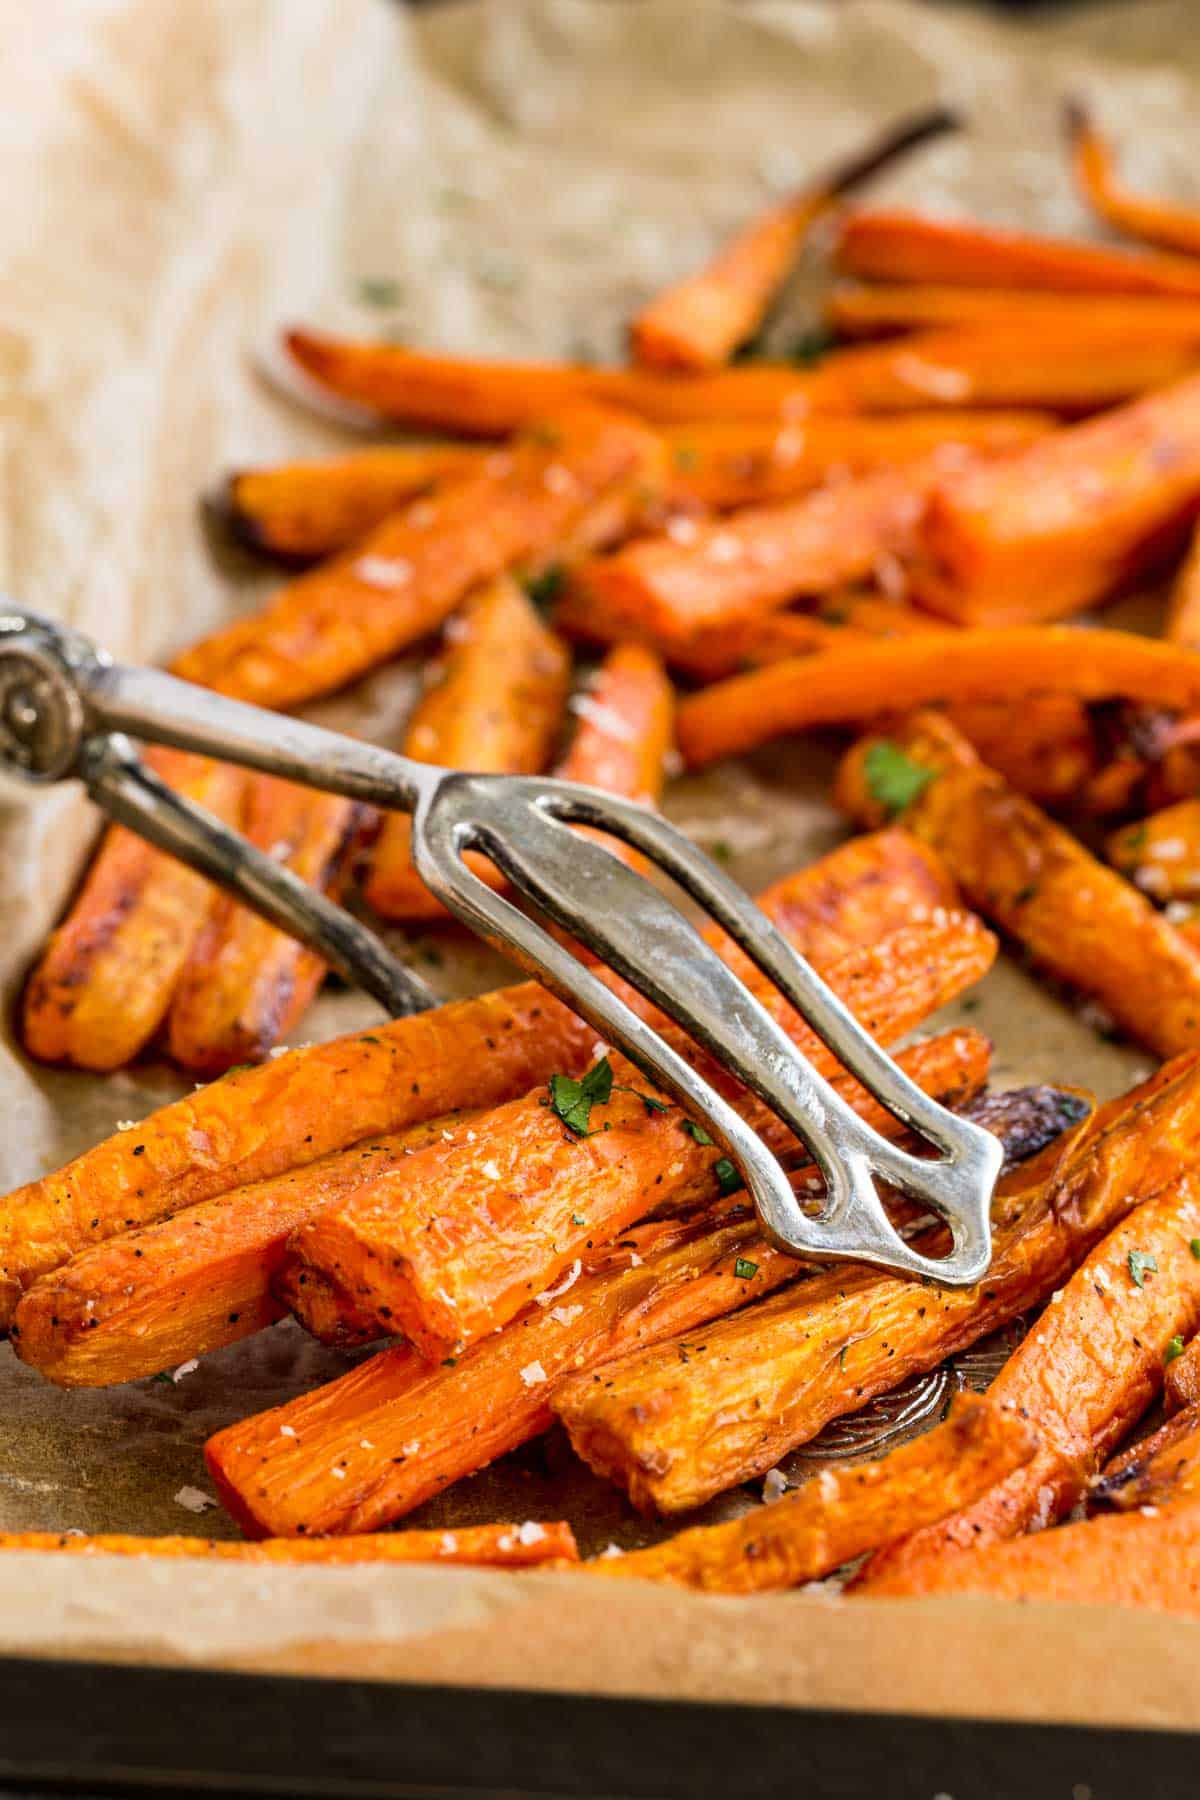 Tongs are used to pick up a serving of air fryer carrots from a baking sheet.